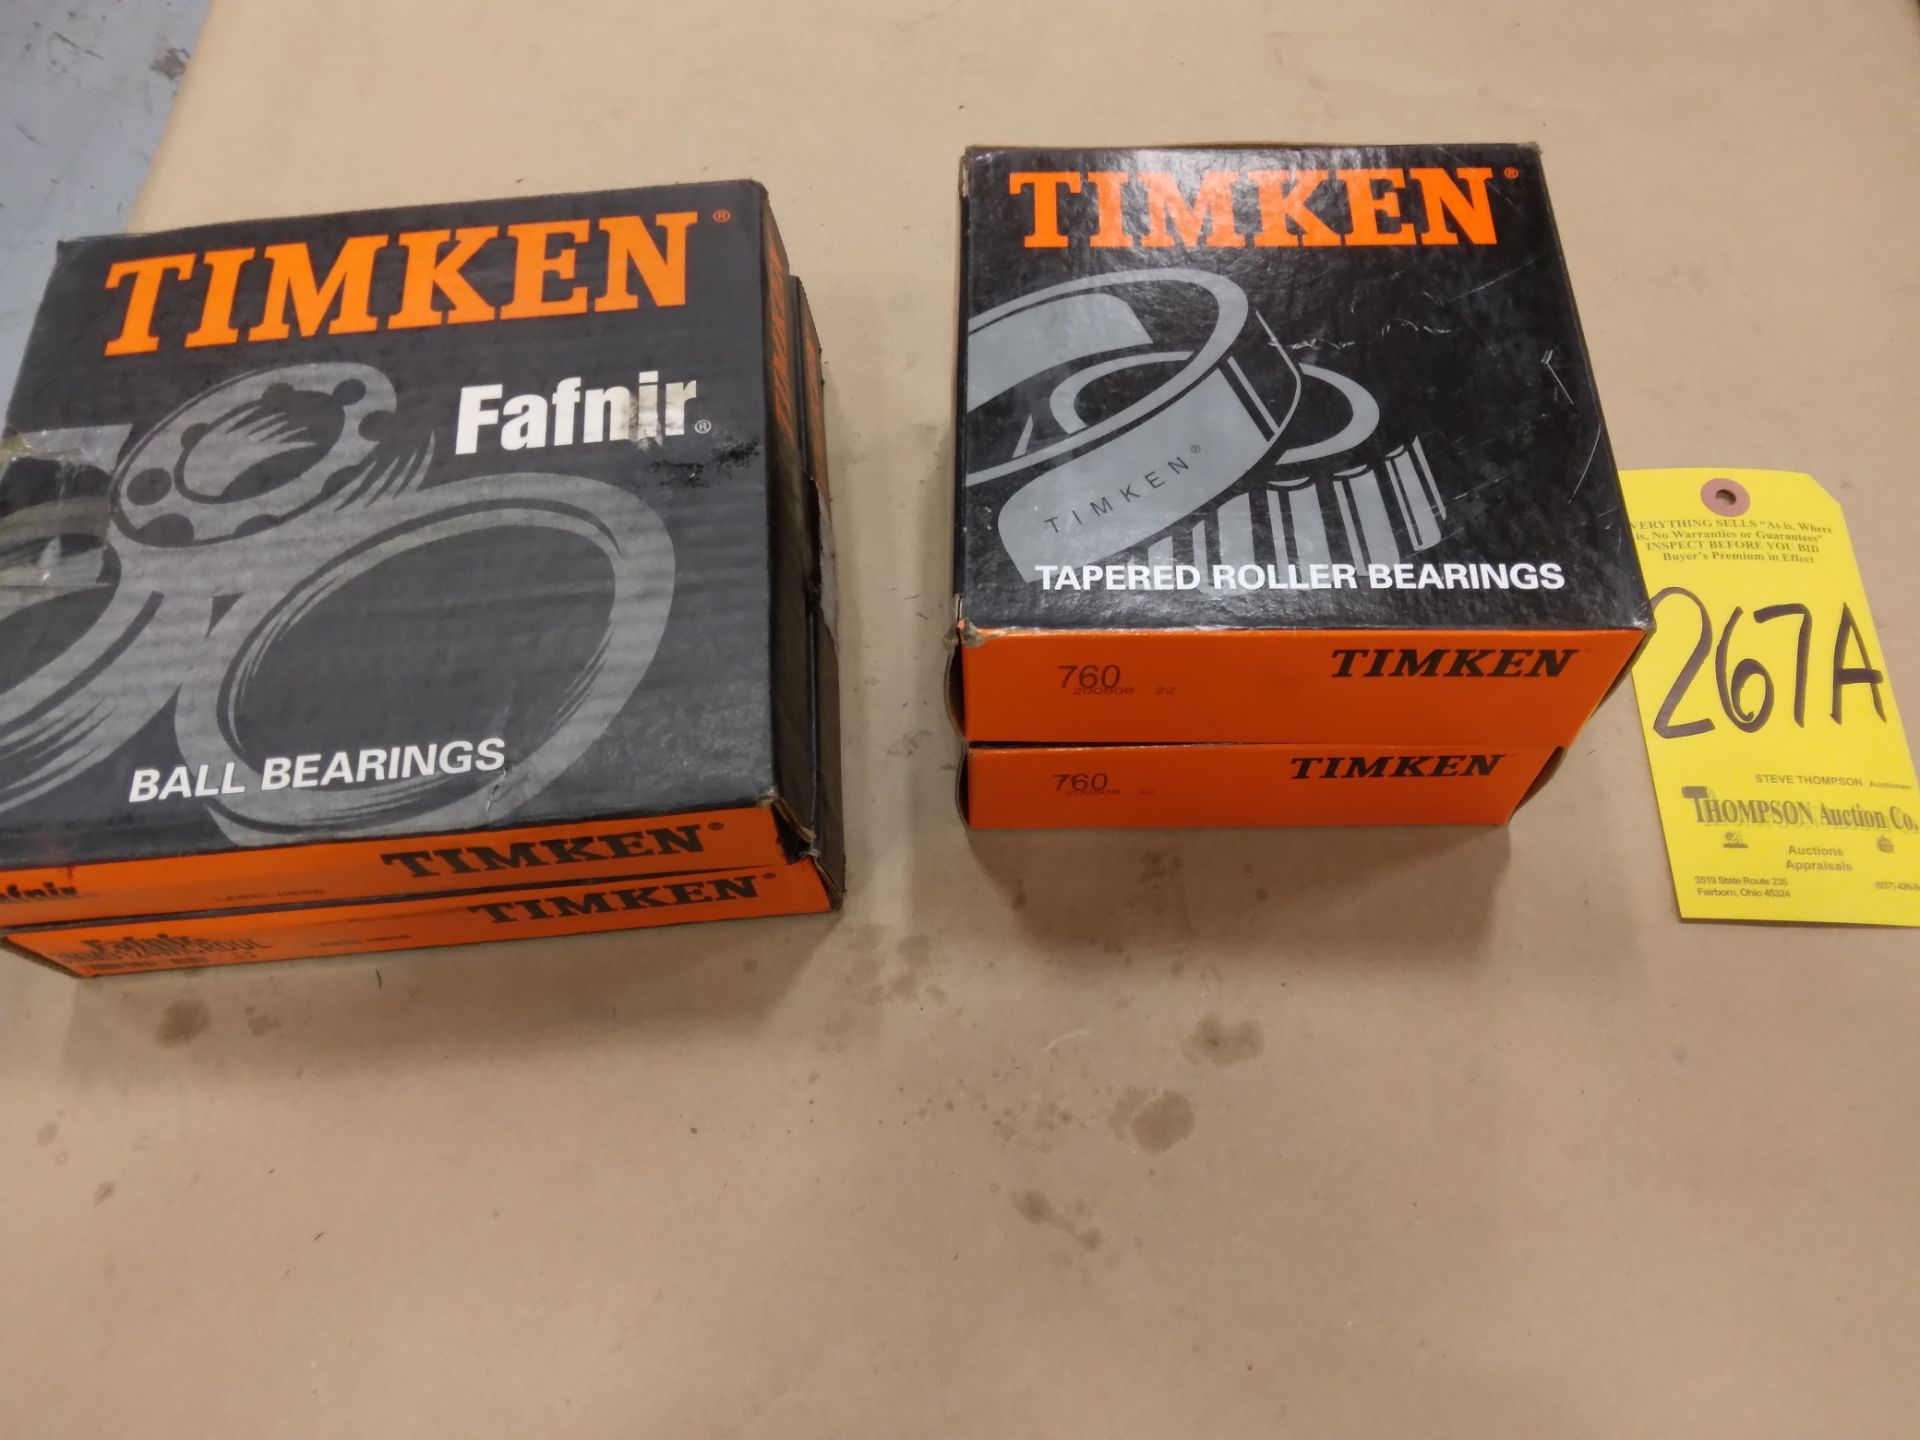 (4) TIMKEN Ball Bearings, (2) #3MM9124WICRDUL, and (2) Tapered Roller Bearings, #760 200808 22